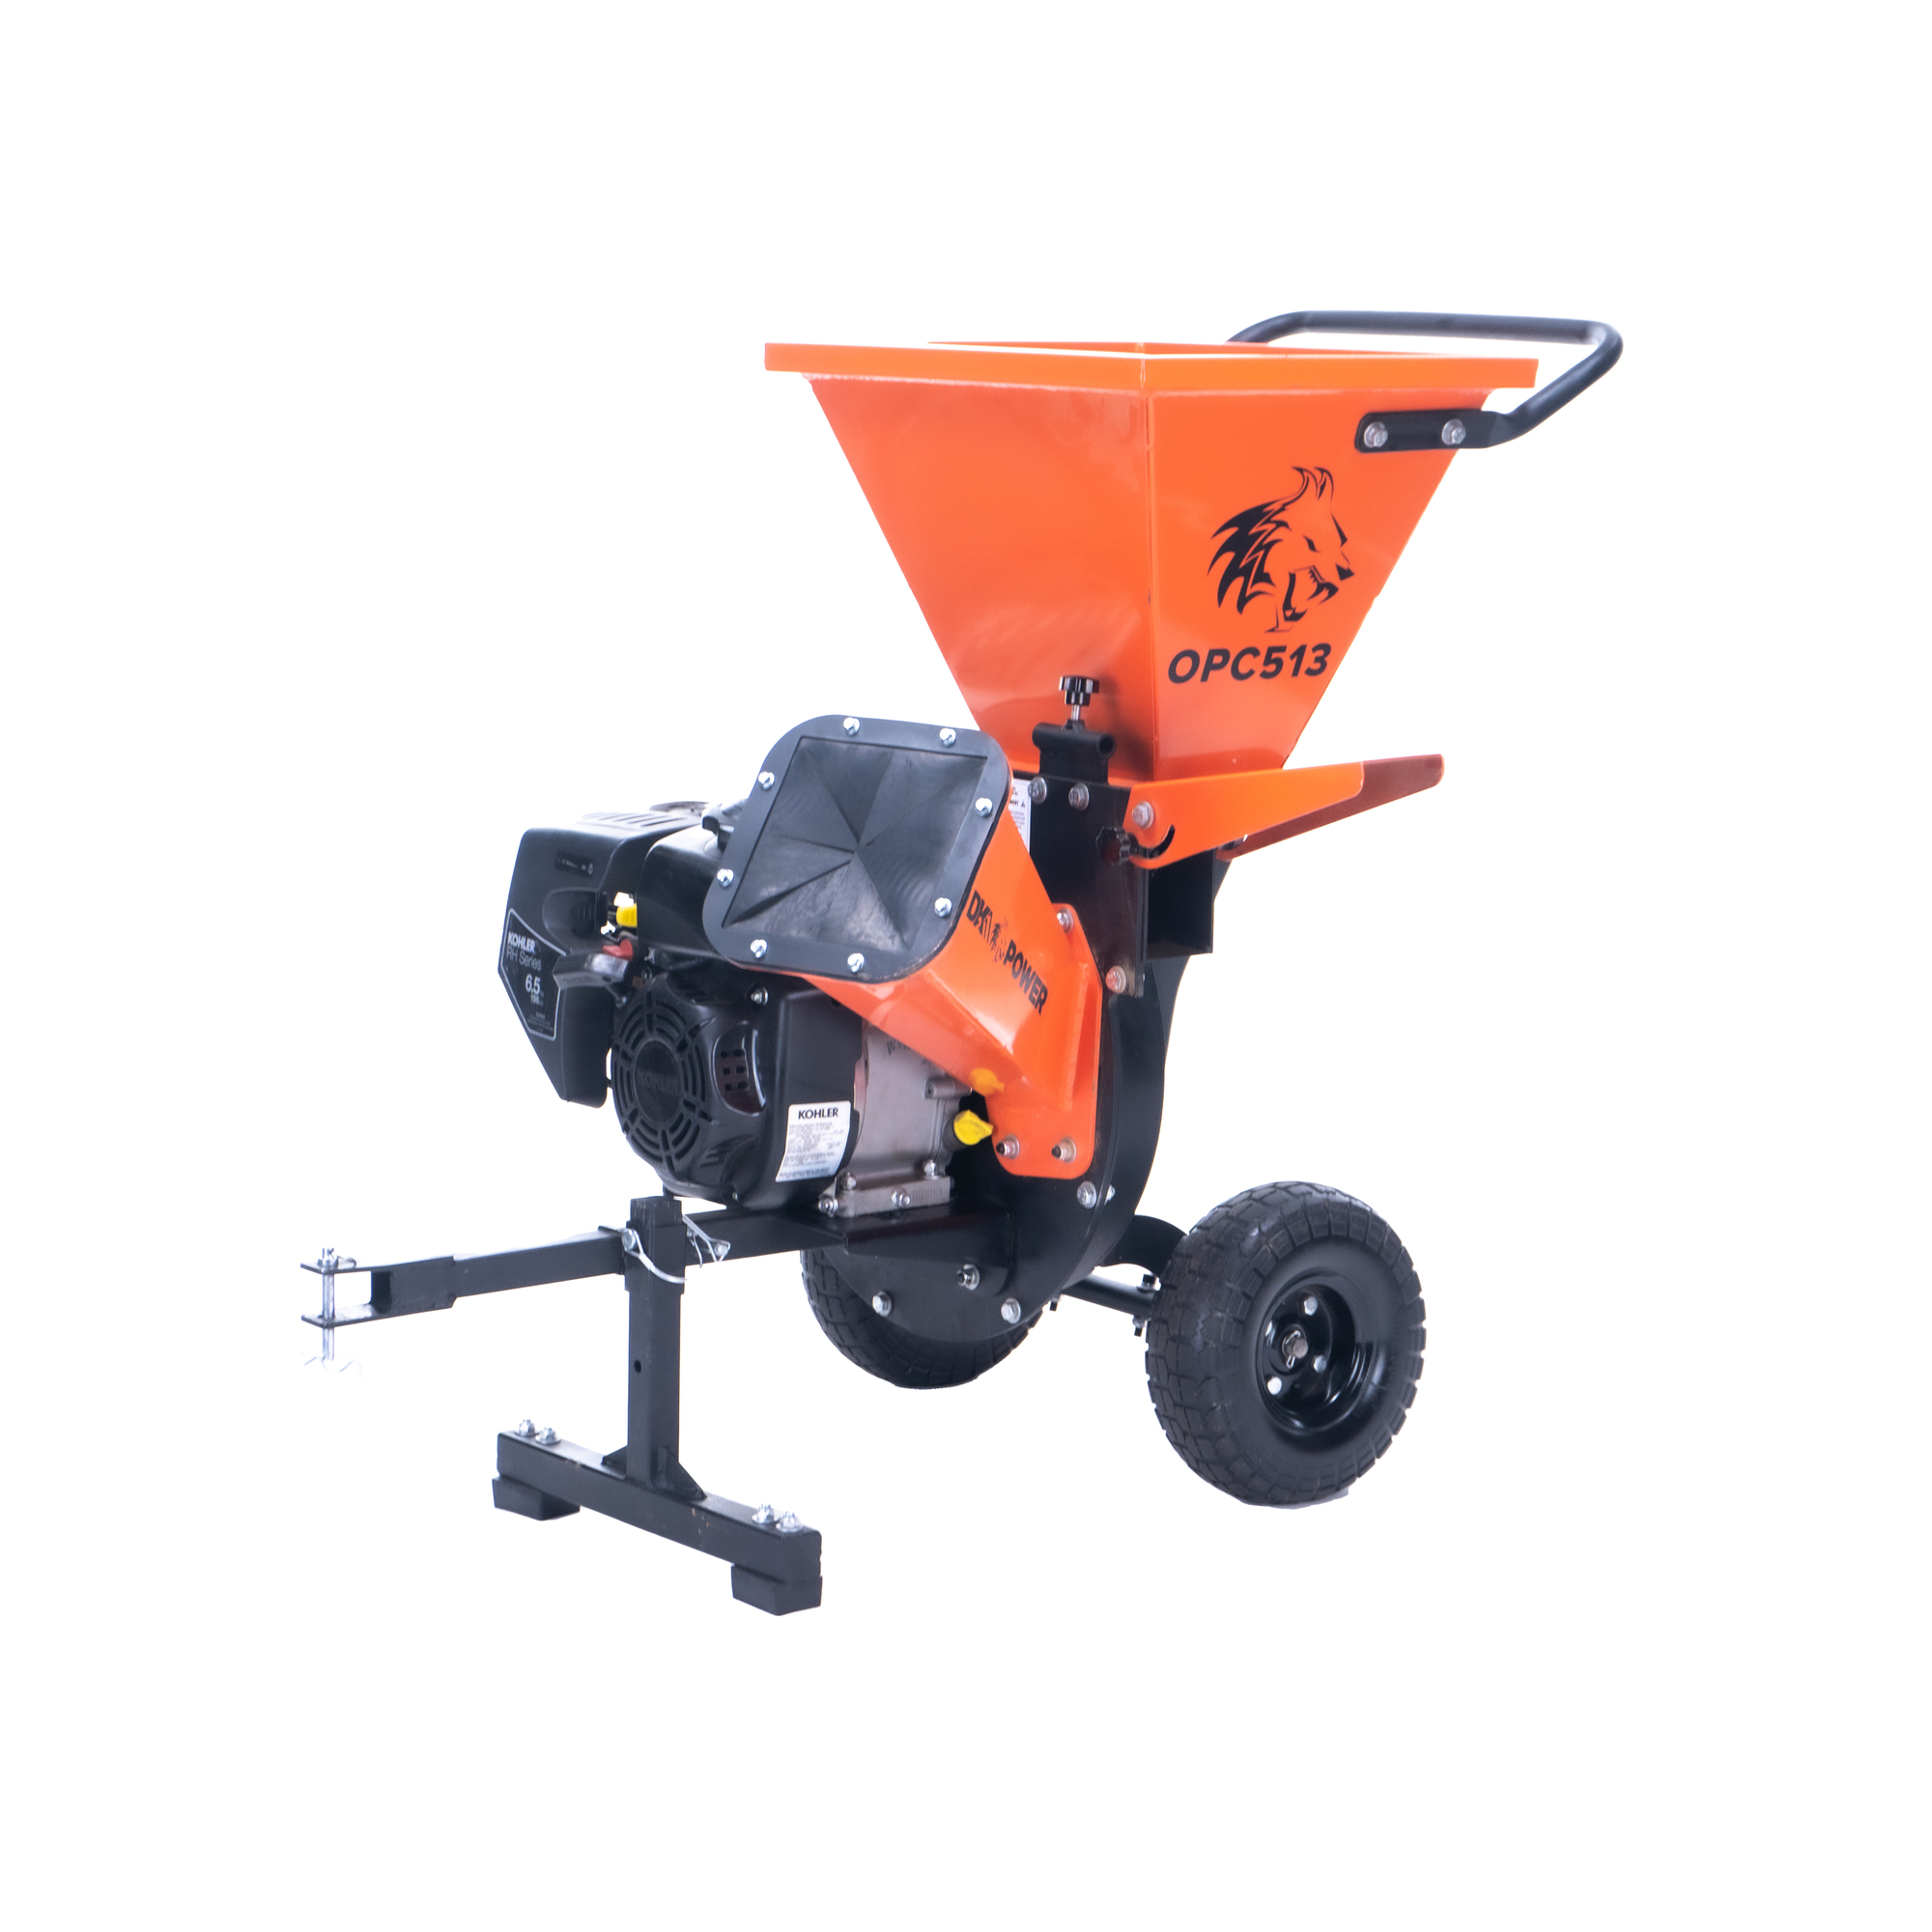 DK2 Power, 3Inch Disk Chipper Shredder 6.5HP 196cc Engine, Engine Displacement 196 cc, Horsepower 6.5, Max. Cutting Thickness 3 in, Model OPC513